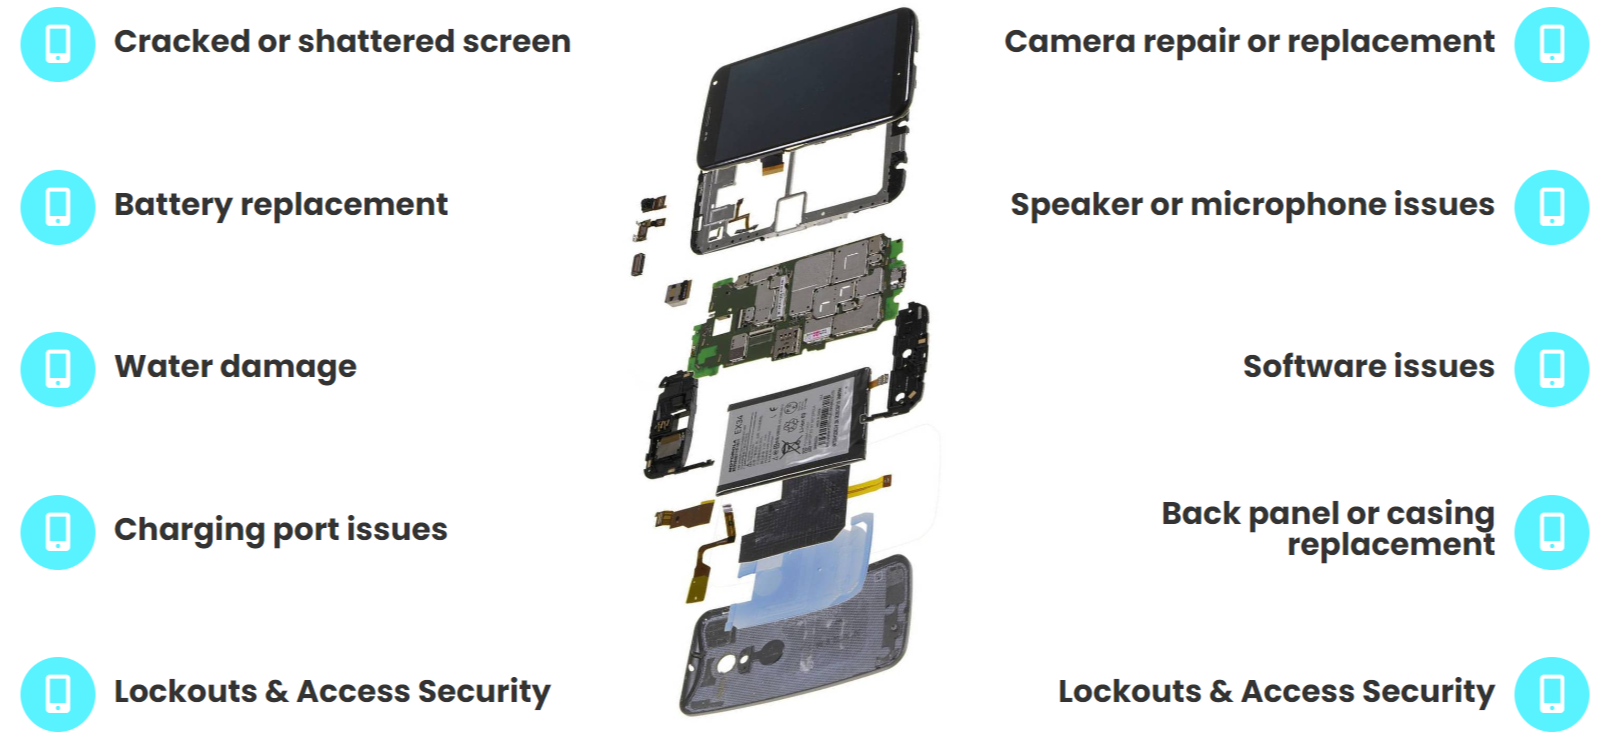 Cell Phone repair troubleshooting components